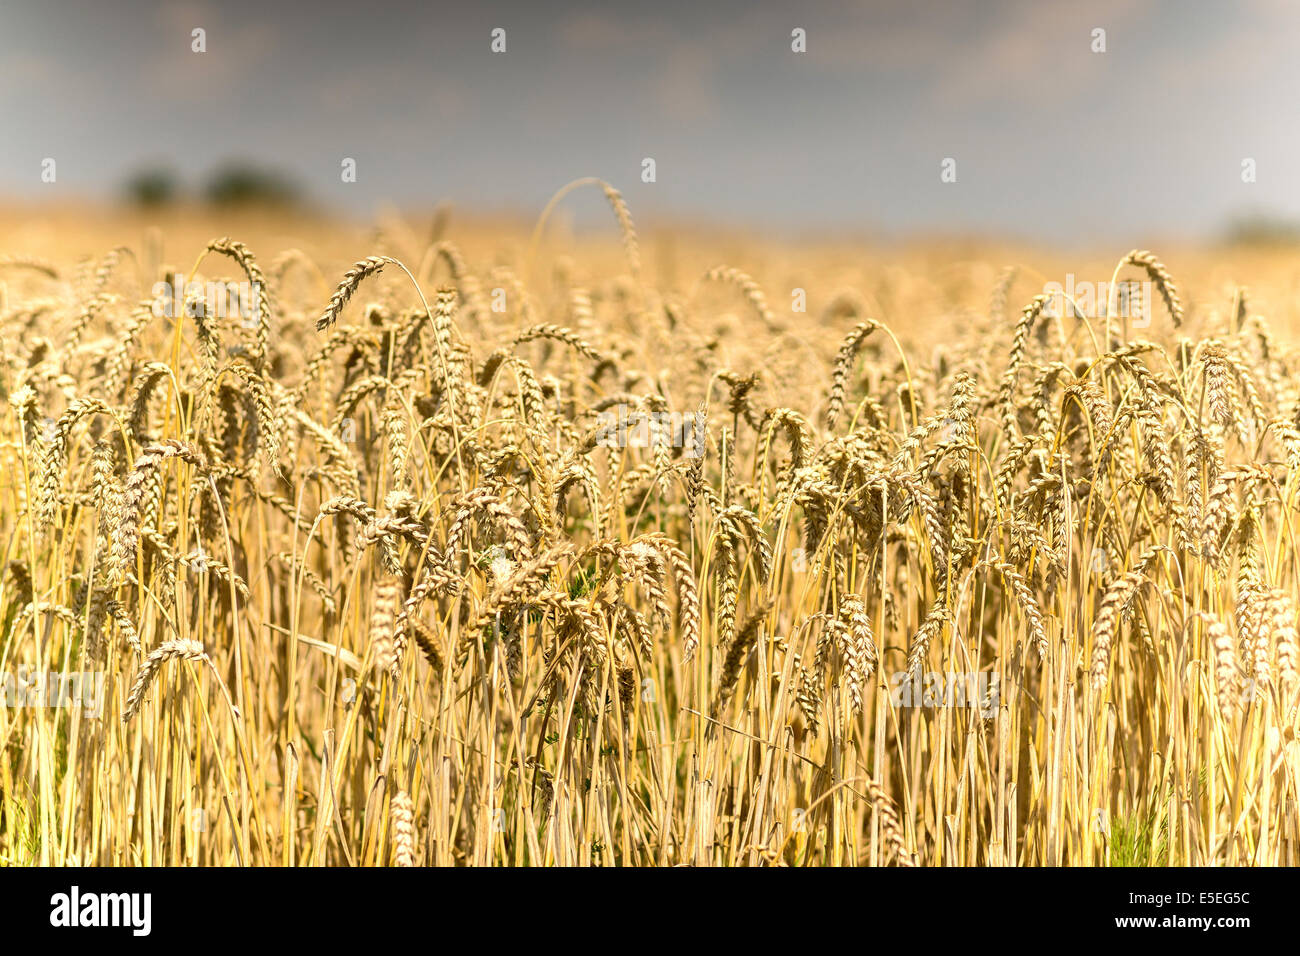 Storm coming over ripe wheat field Stock Photo